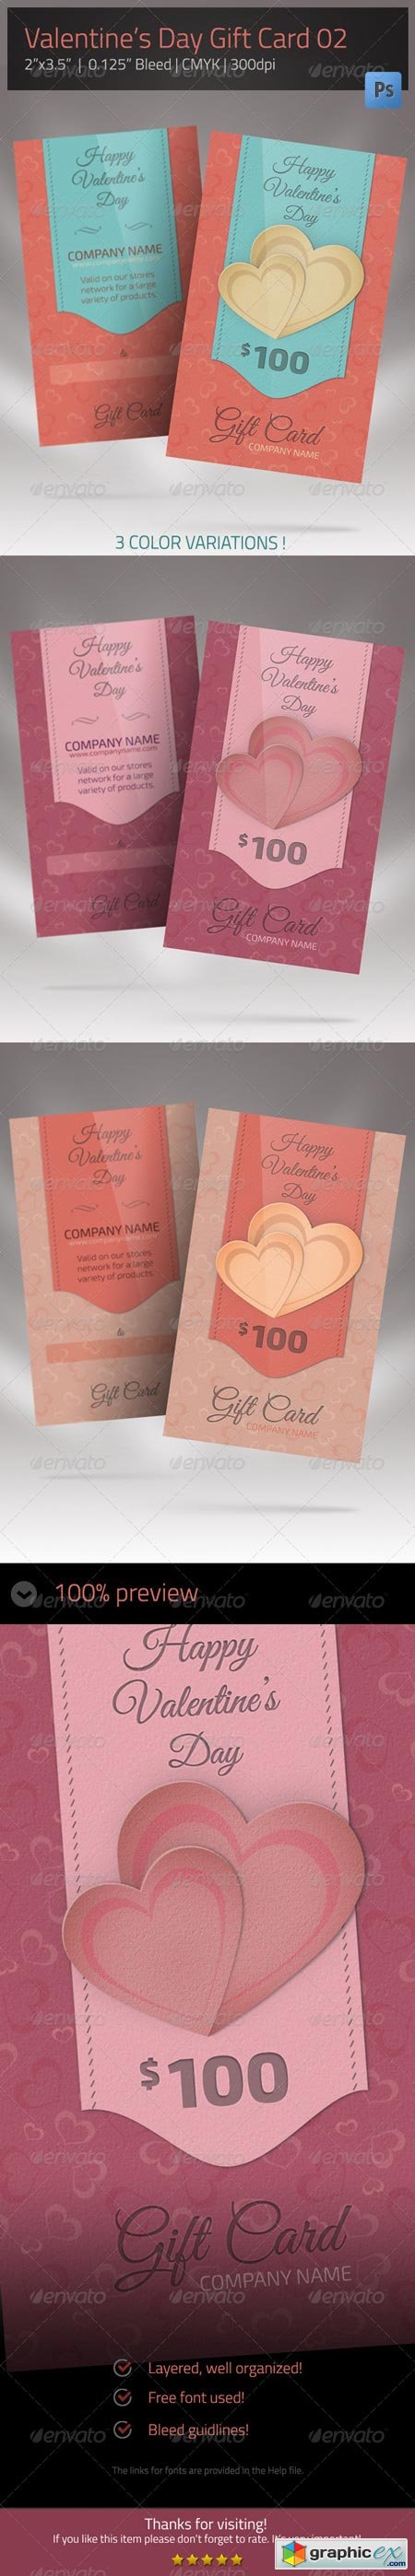 Gift Card for Valentines Day 02 6674189